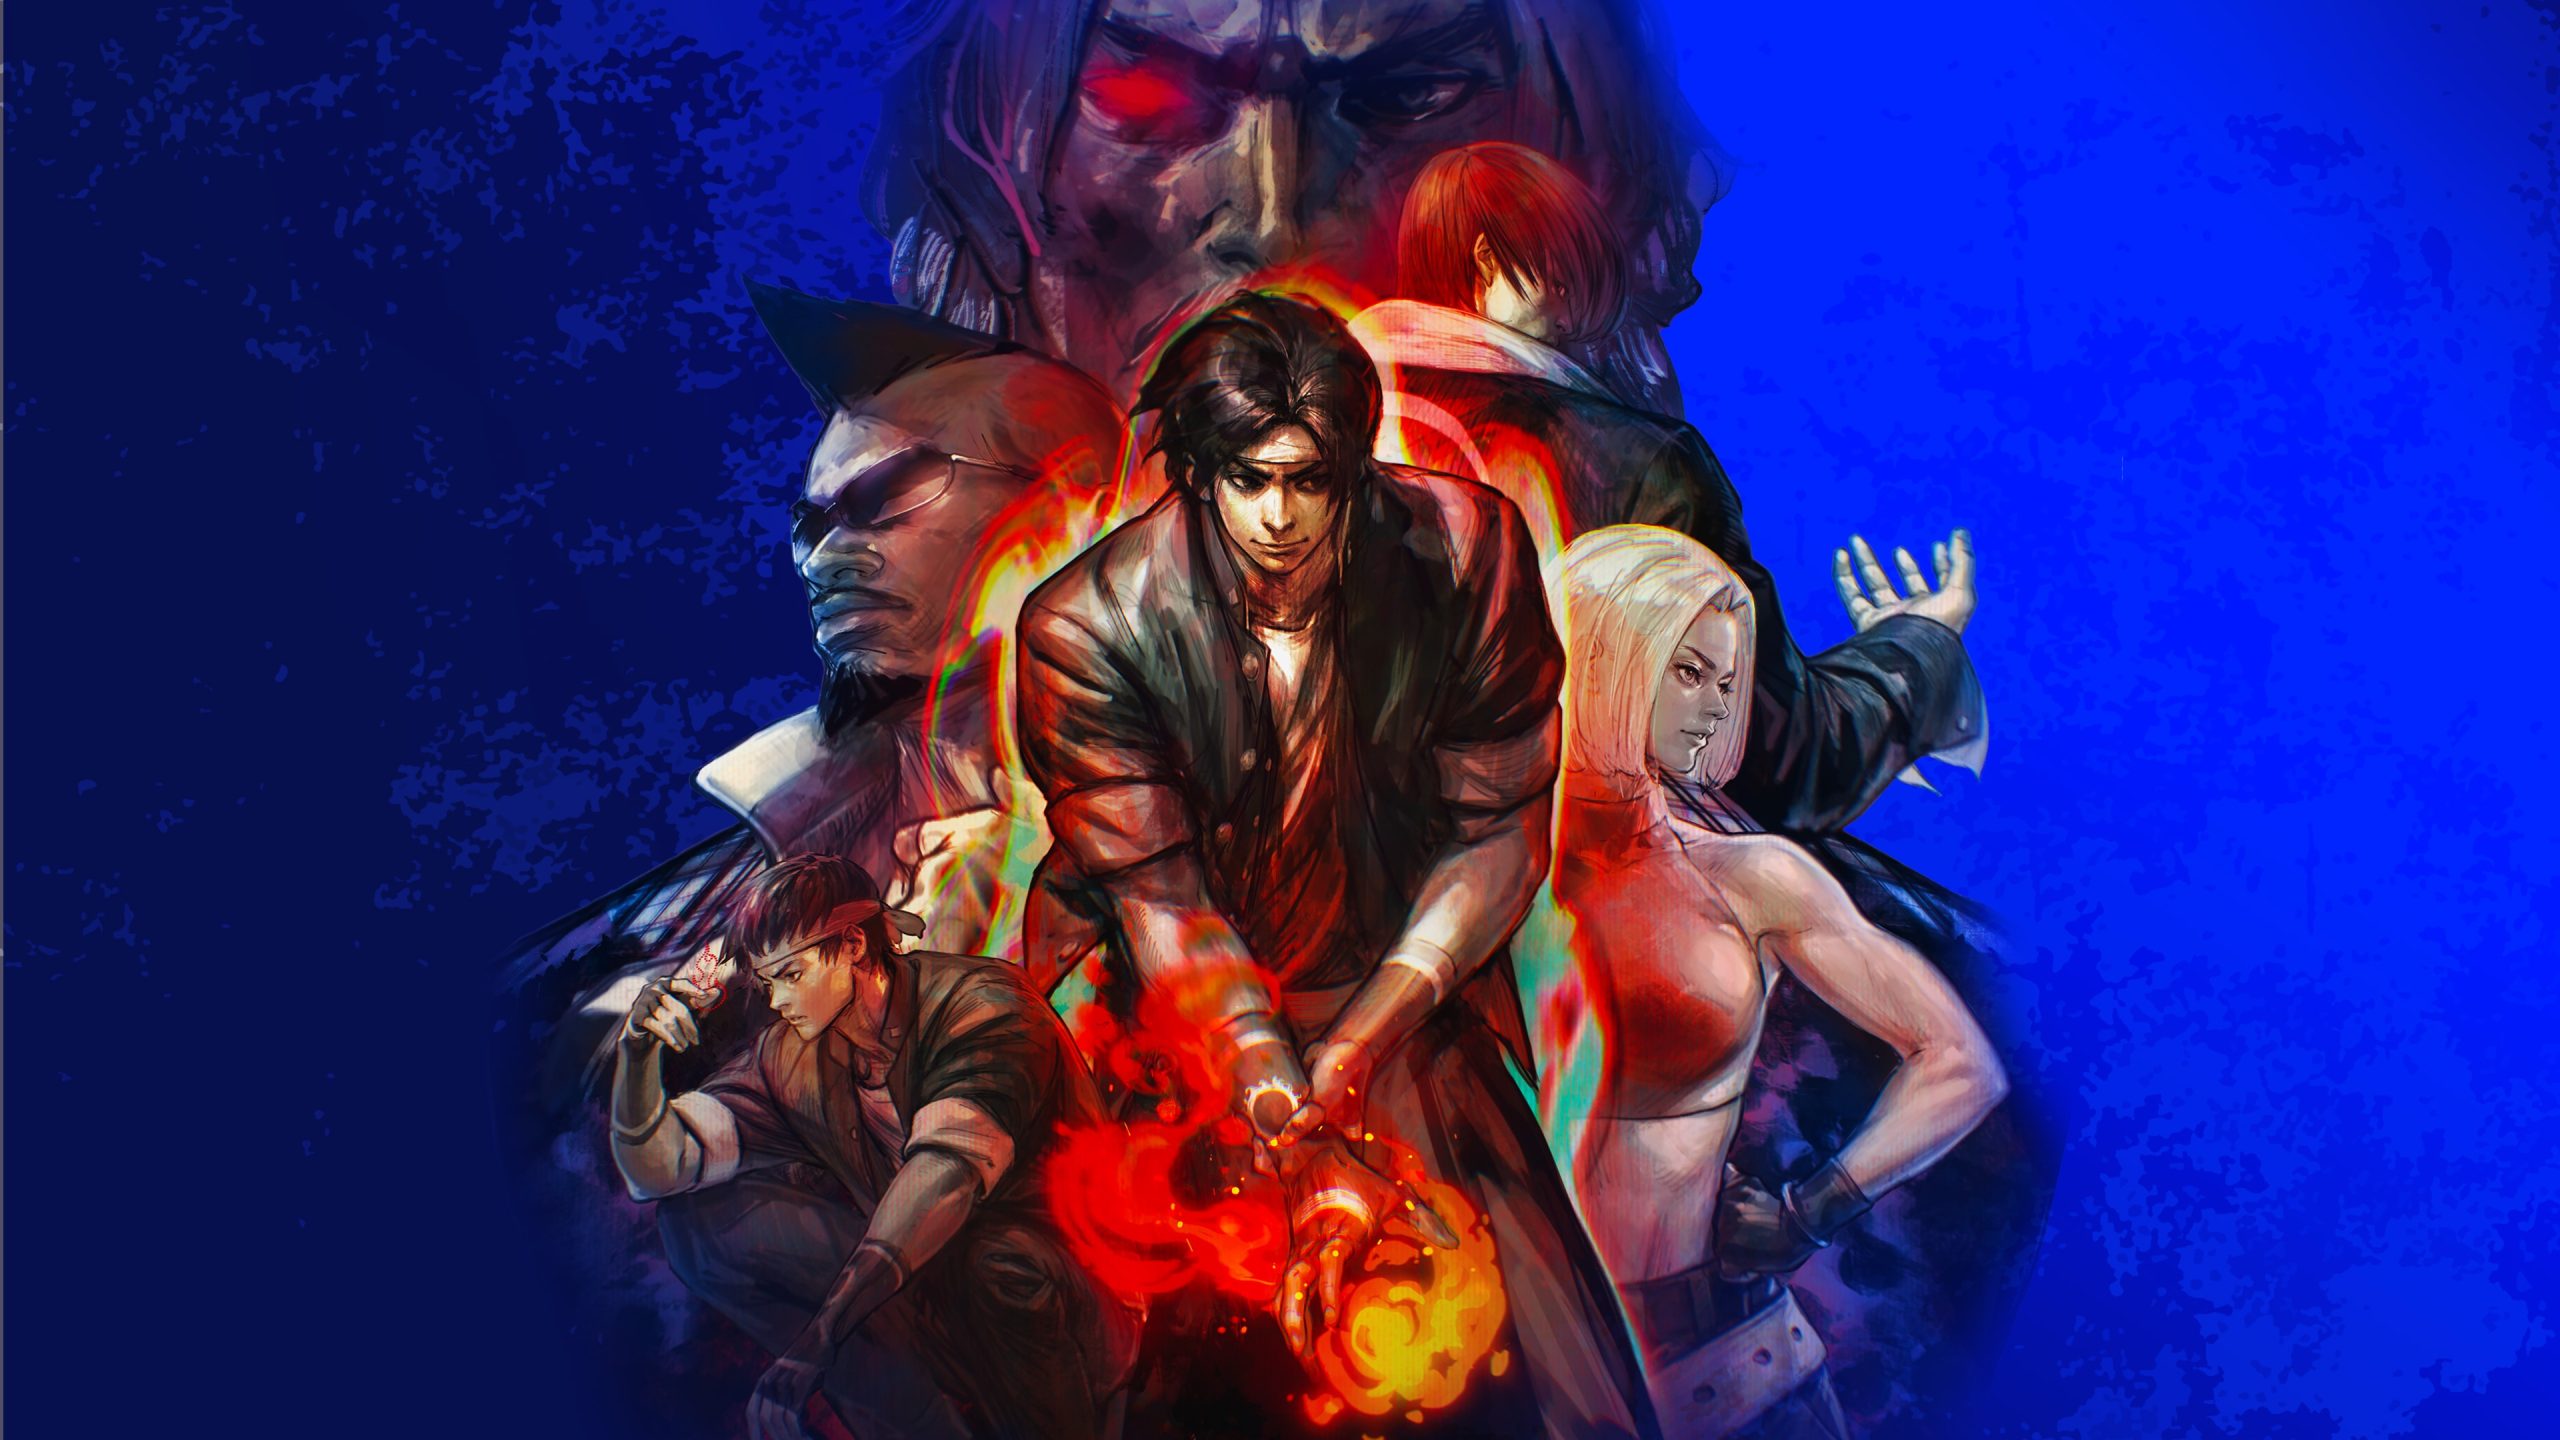 Hints King OF Fighters 98 APK + Mod for Android.